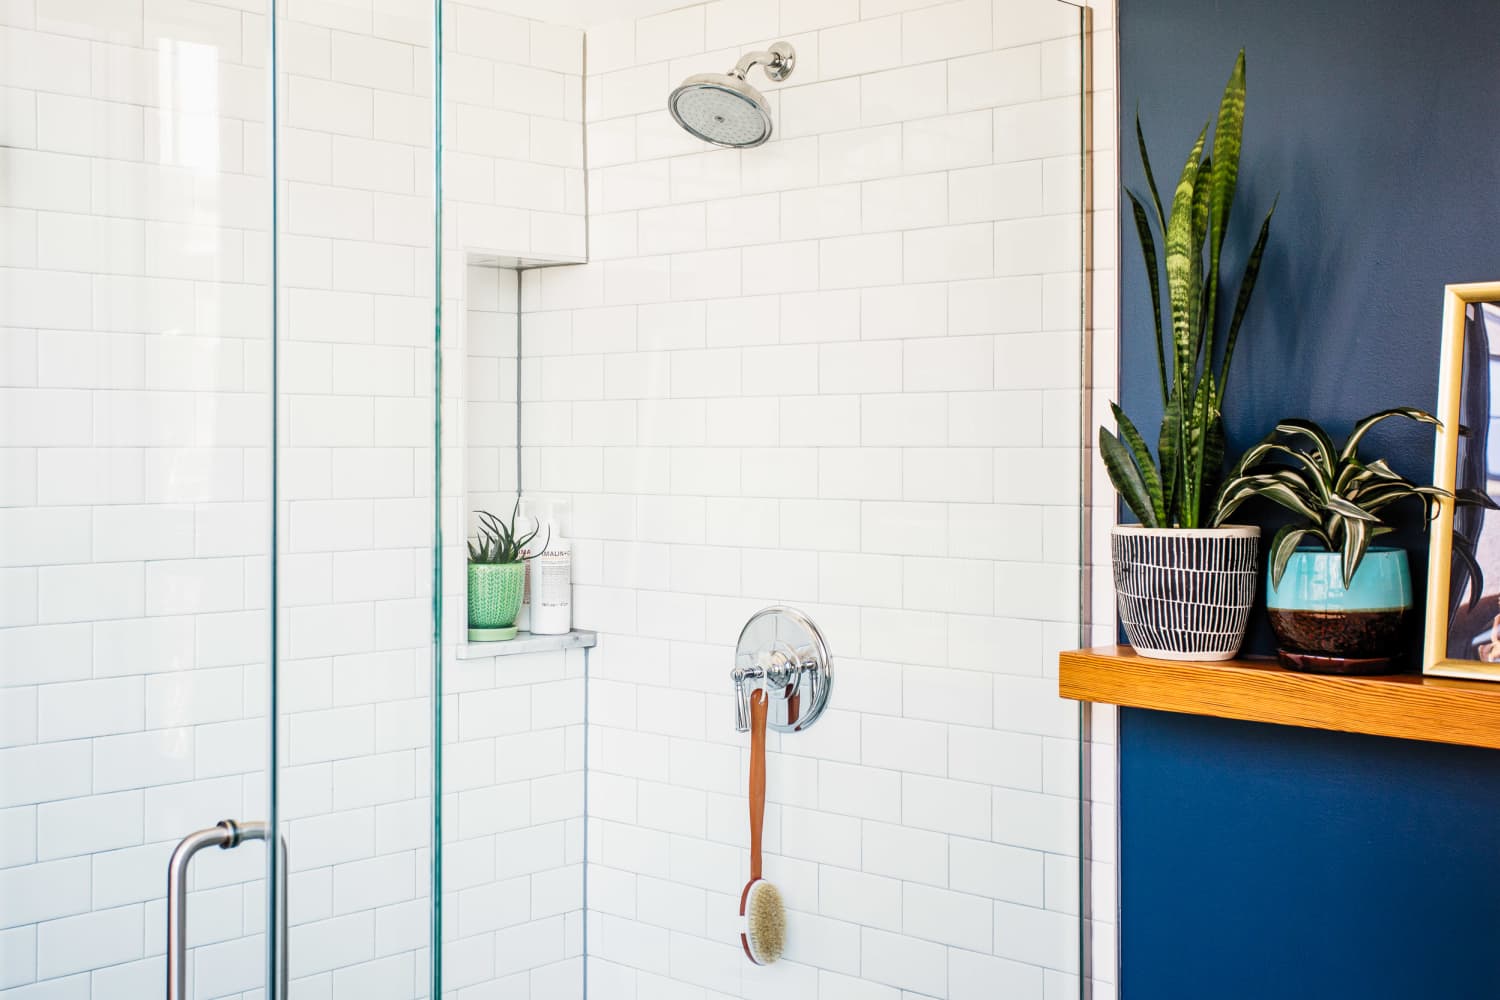 The Surprising $7 Product That Keeps My Shower Doors Spot-Free for Weeks at a Time